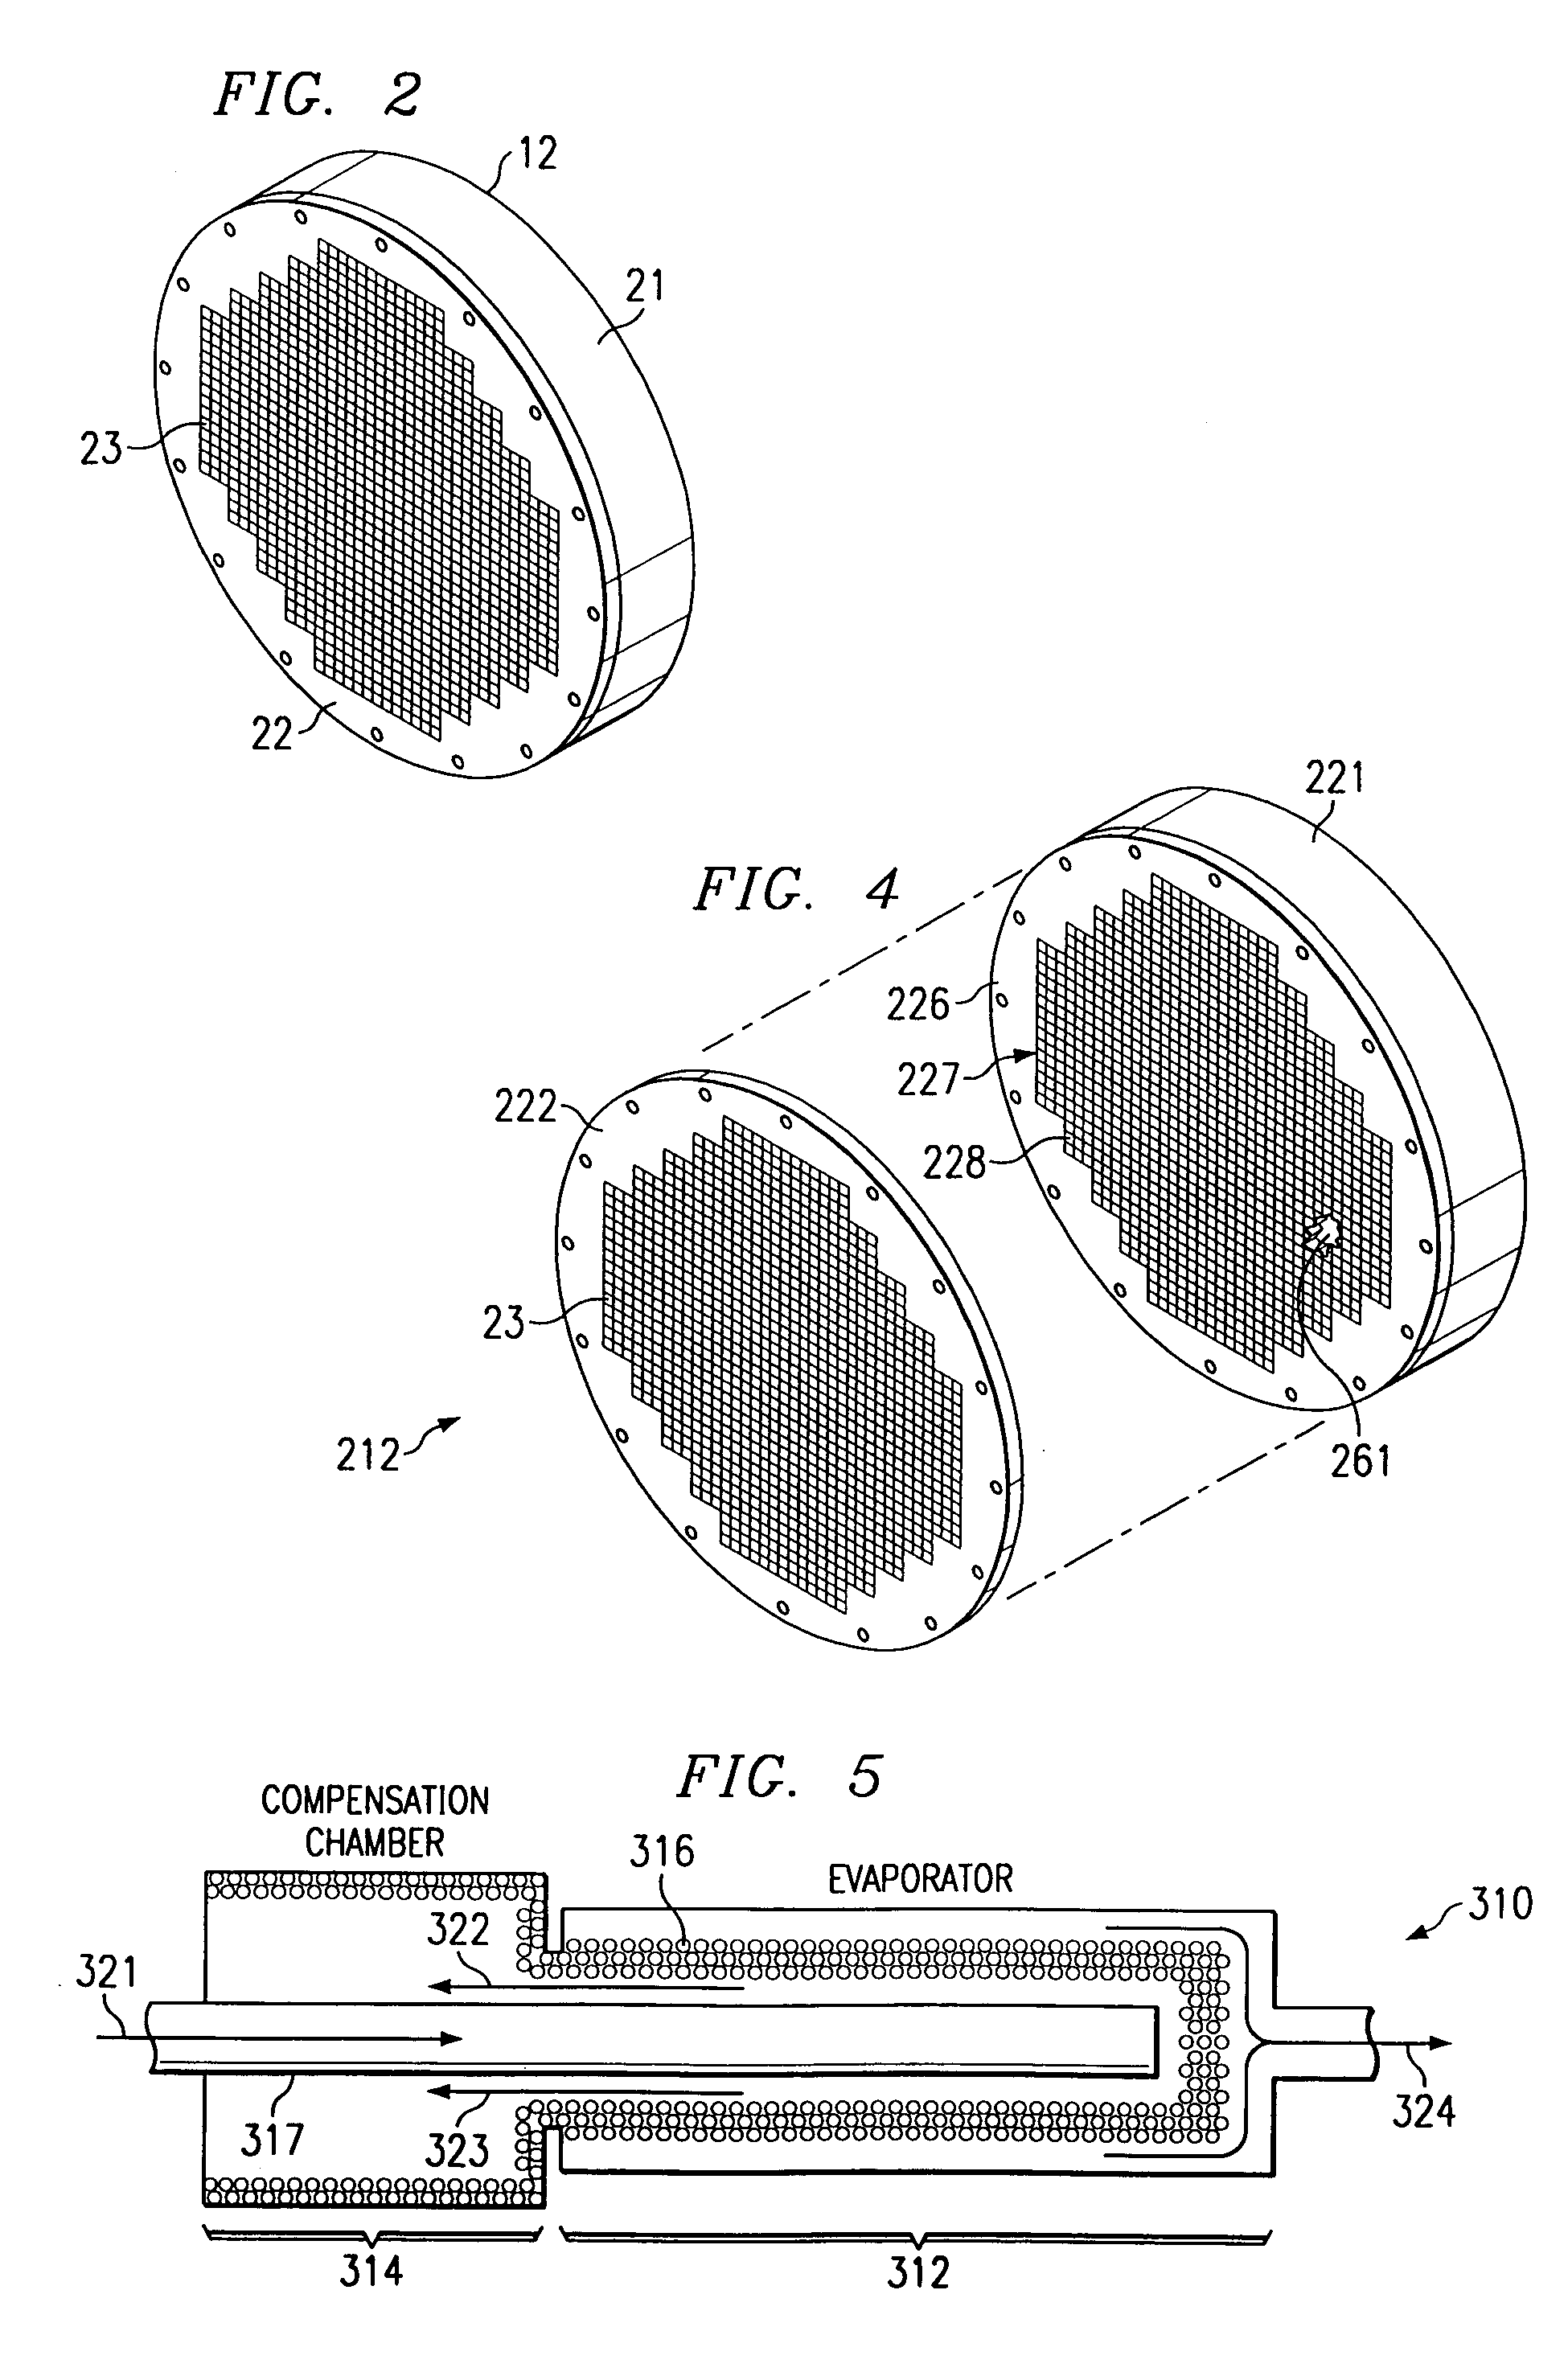 Method and apparatus for controlling temperature gradients within a structure being cooled